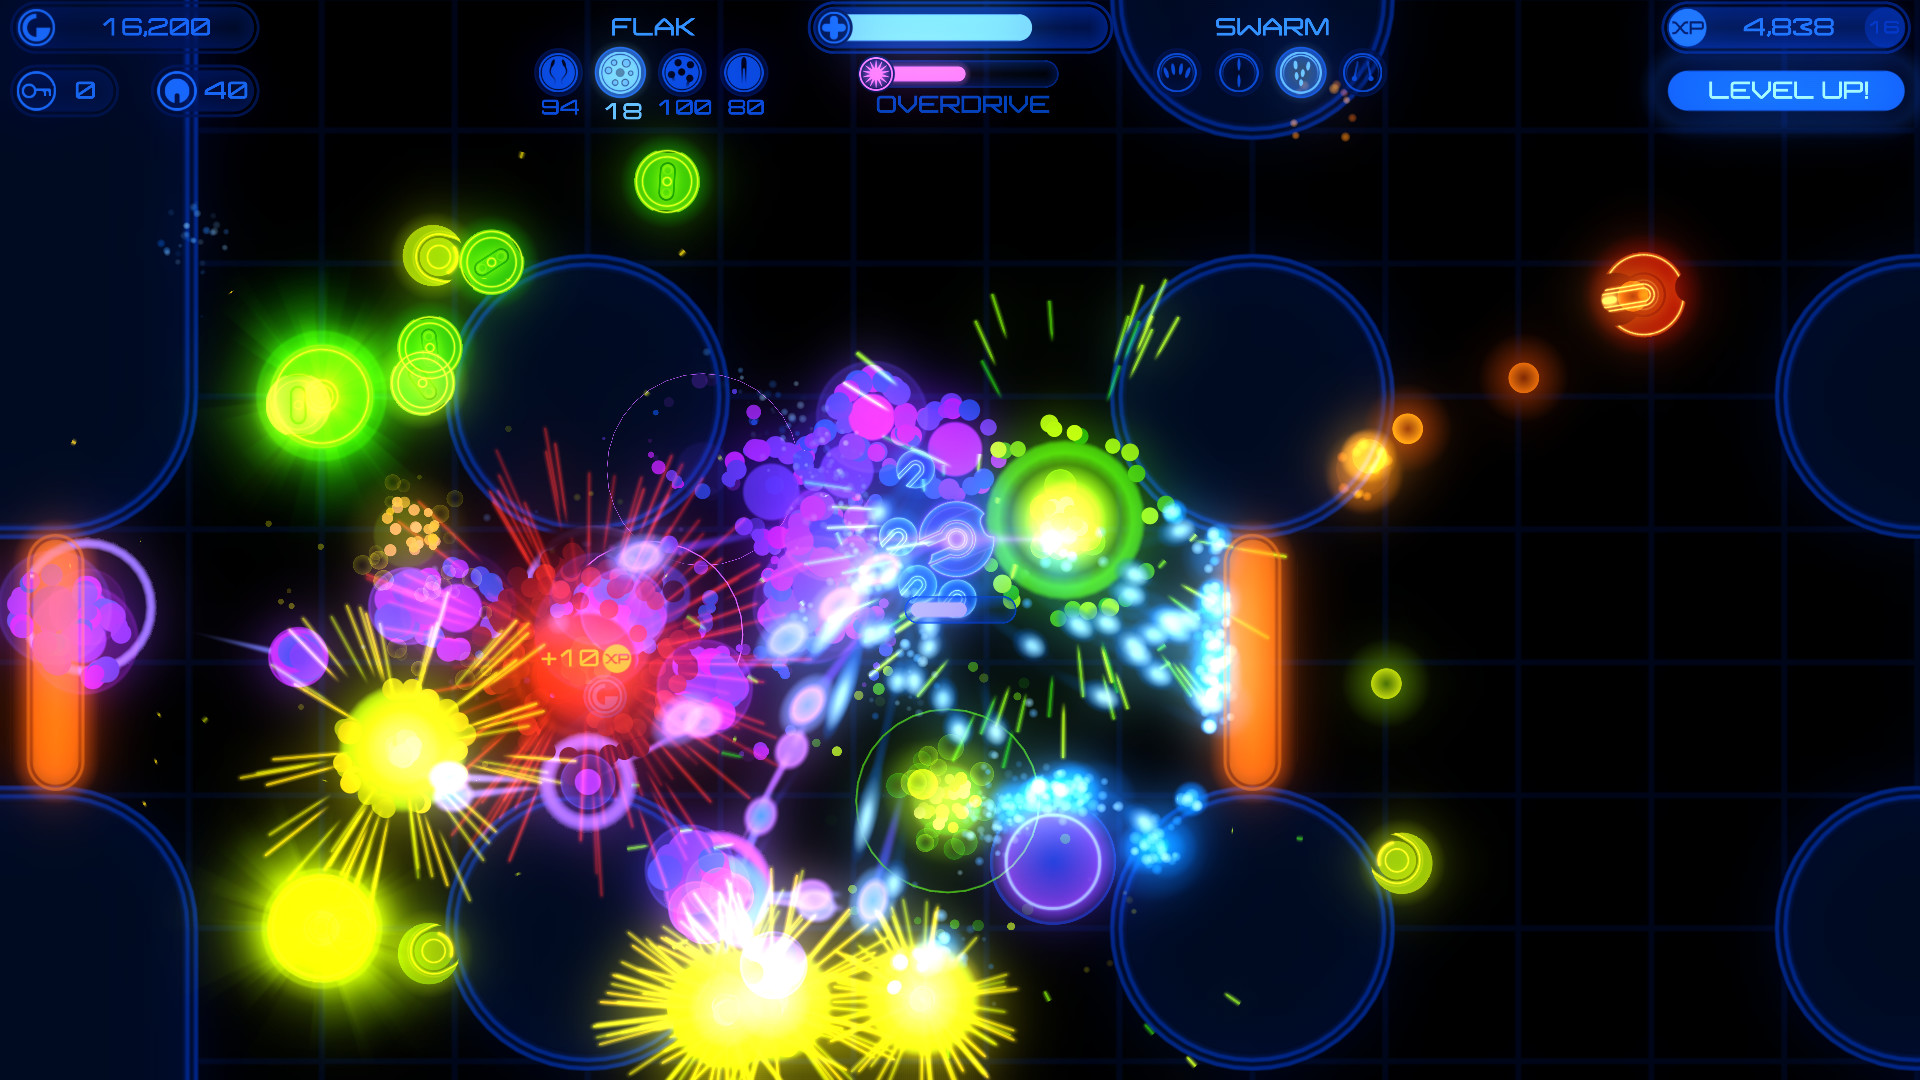 Again, a blue neon maze but now with even more explosions and brighter colours.